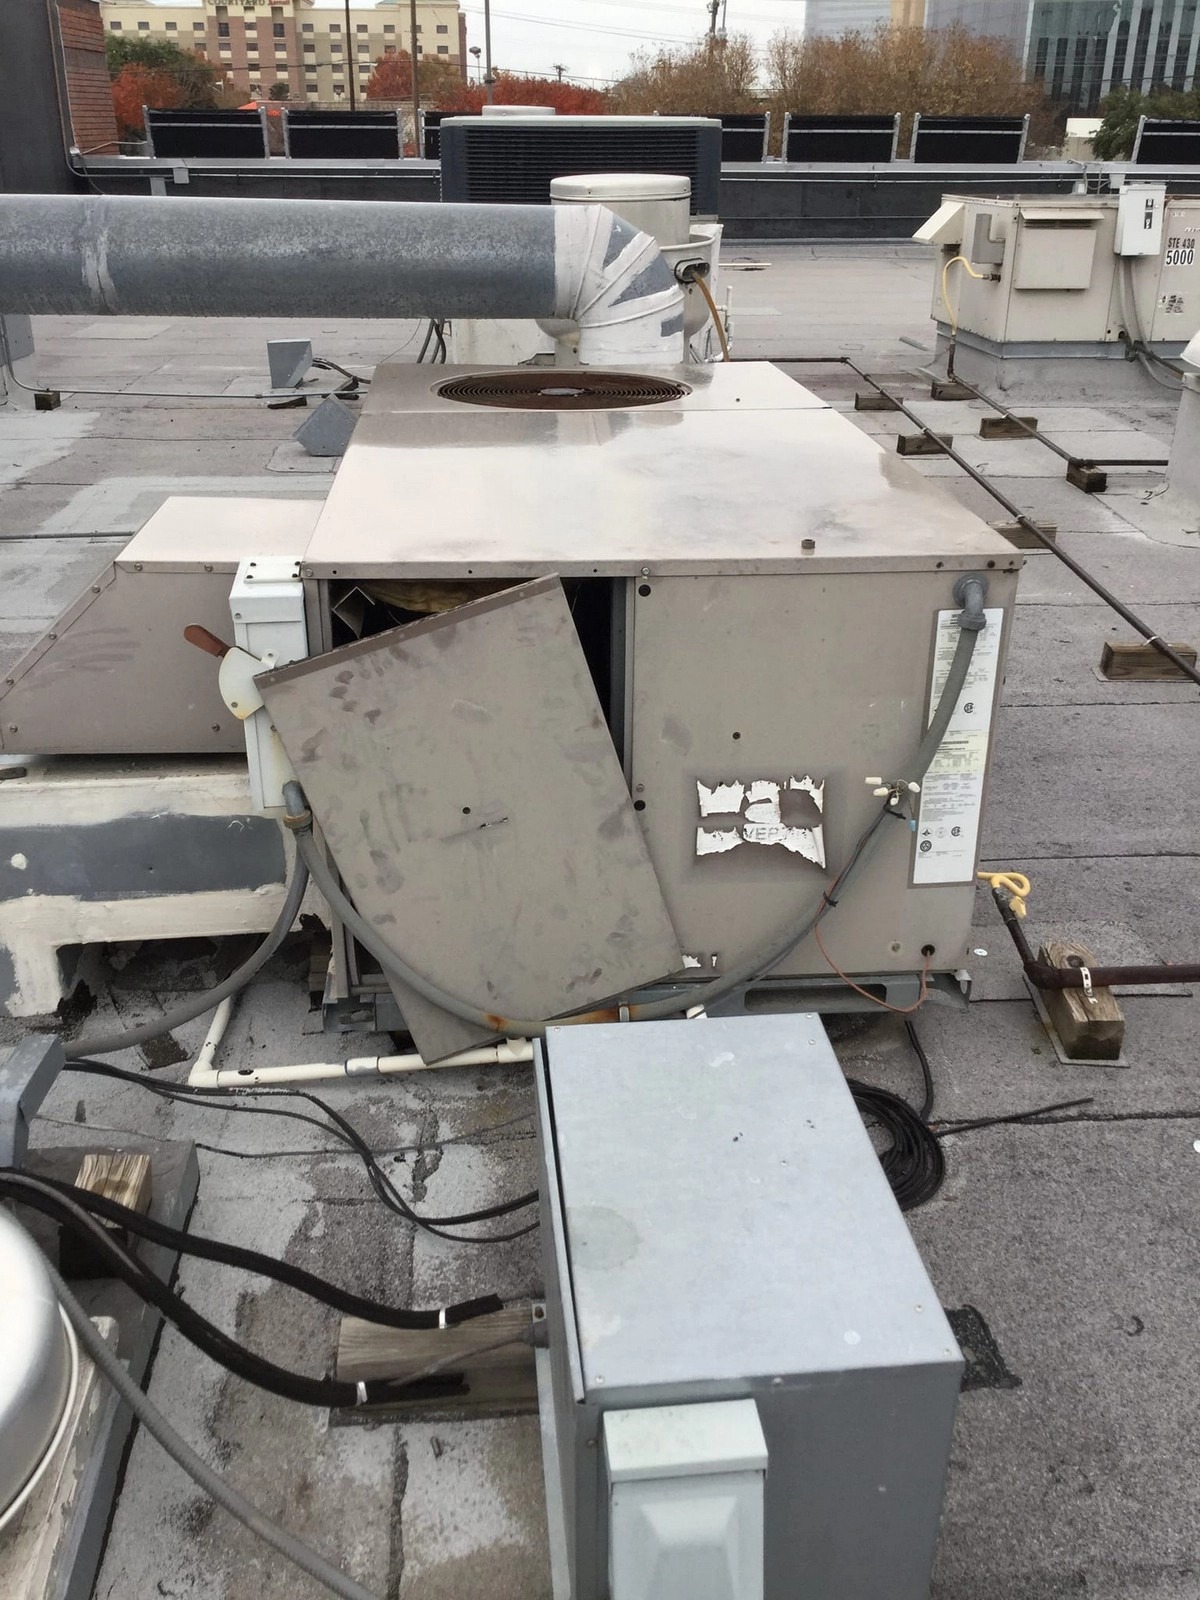 An HVAC unit on the roof of a building in need of HVAC maintenance services.